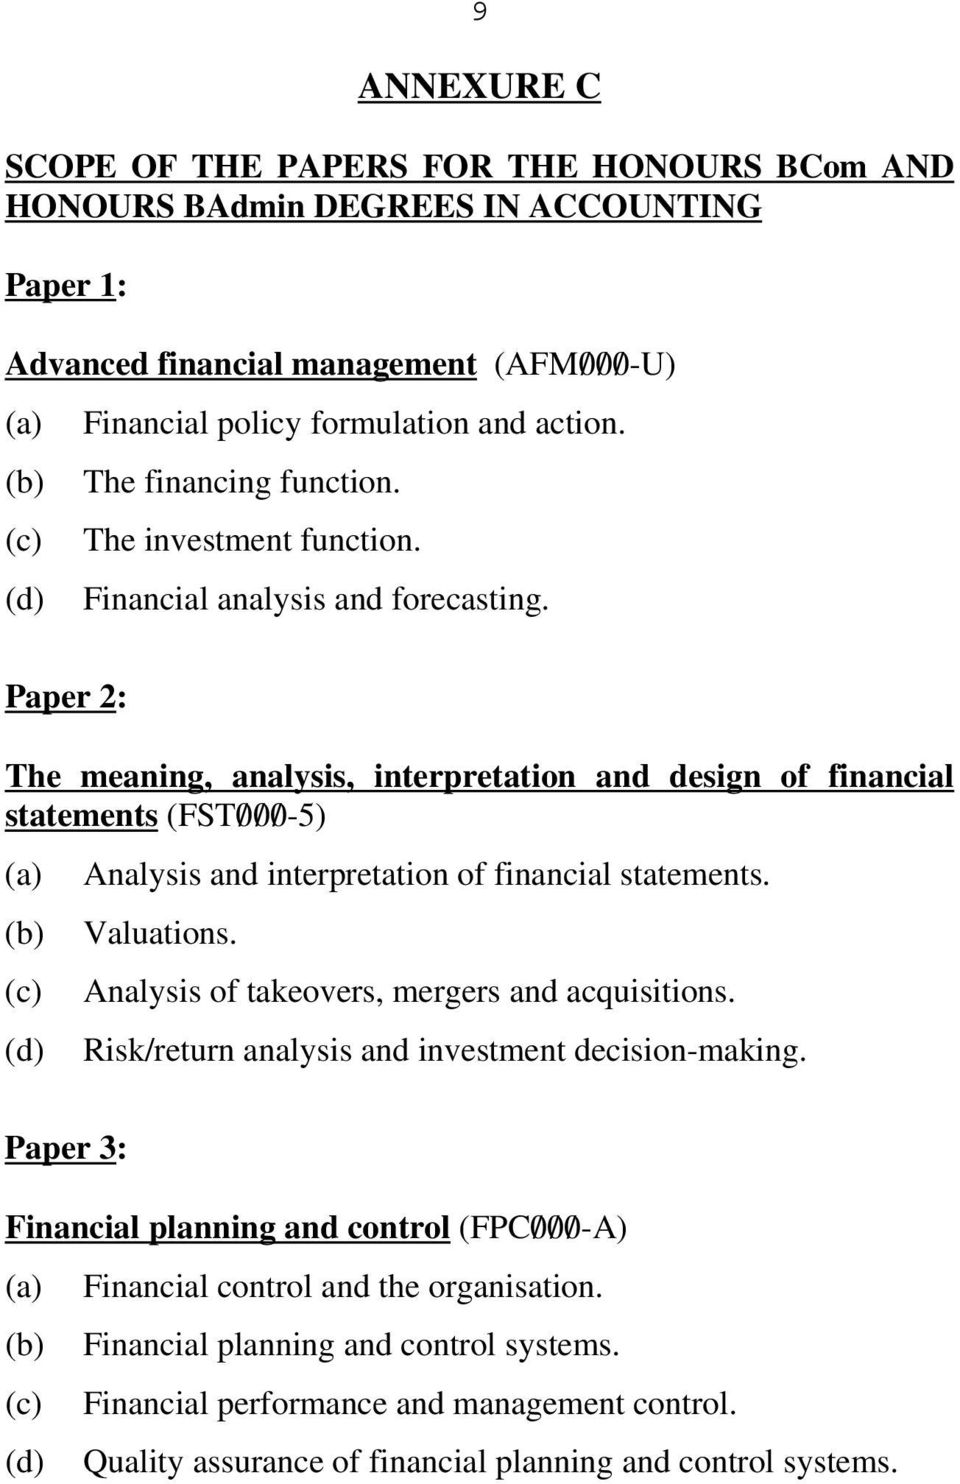 Paper 2: The meaning, analysis, interpretation and design of financial statements (FST0/0/0/-5) (a) Analysis and interpretation of financial statements. (b) Valuations.